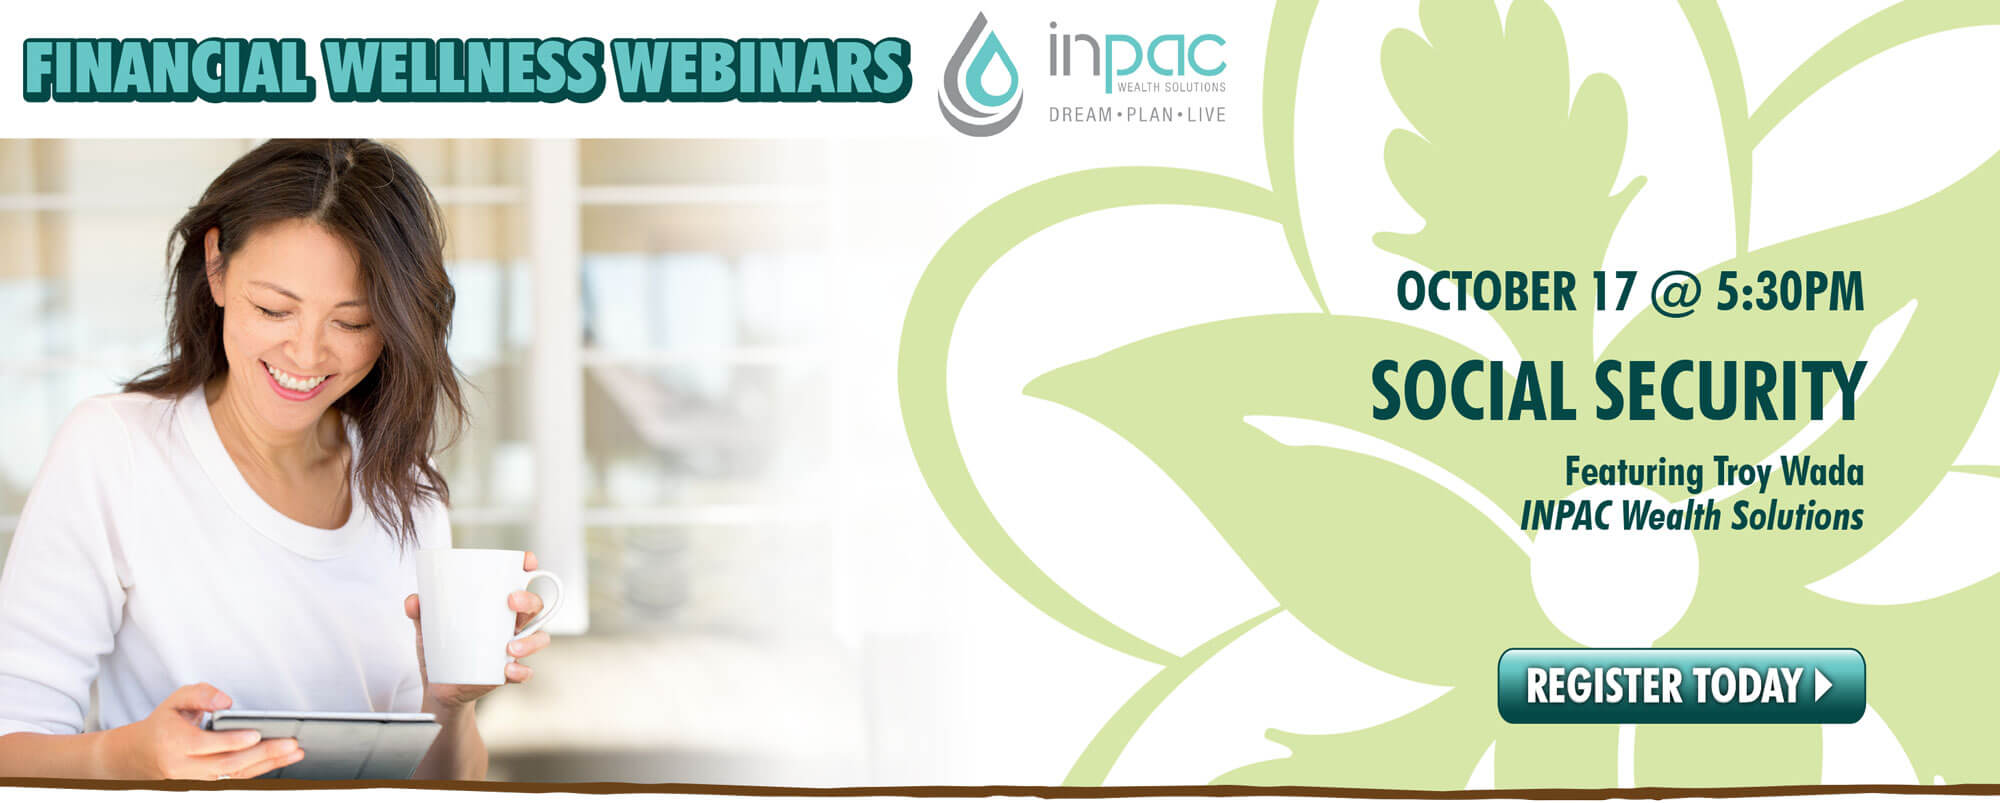 Join INPAC for their FREE webinar featuring Troy Wada on Tuesday, October 17.  RSVP Today!